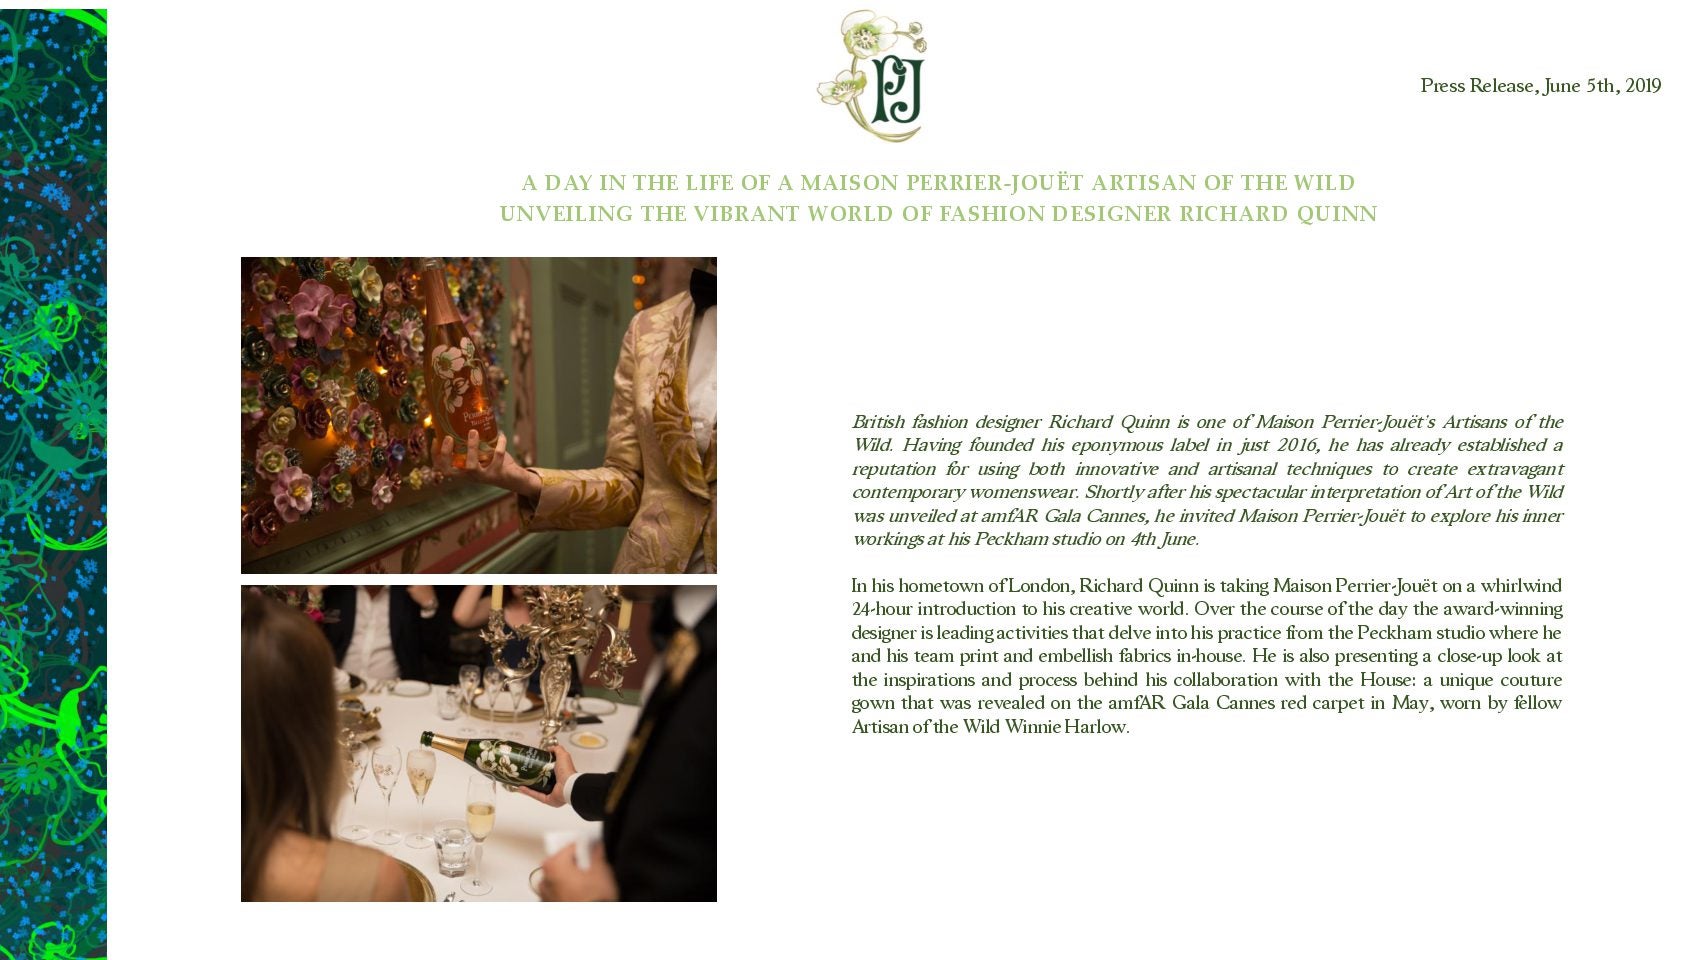 Perrier-Jouët Press Release - A day in the life of a Maison Perrier-Jouët Artisan of the Wild